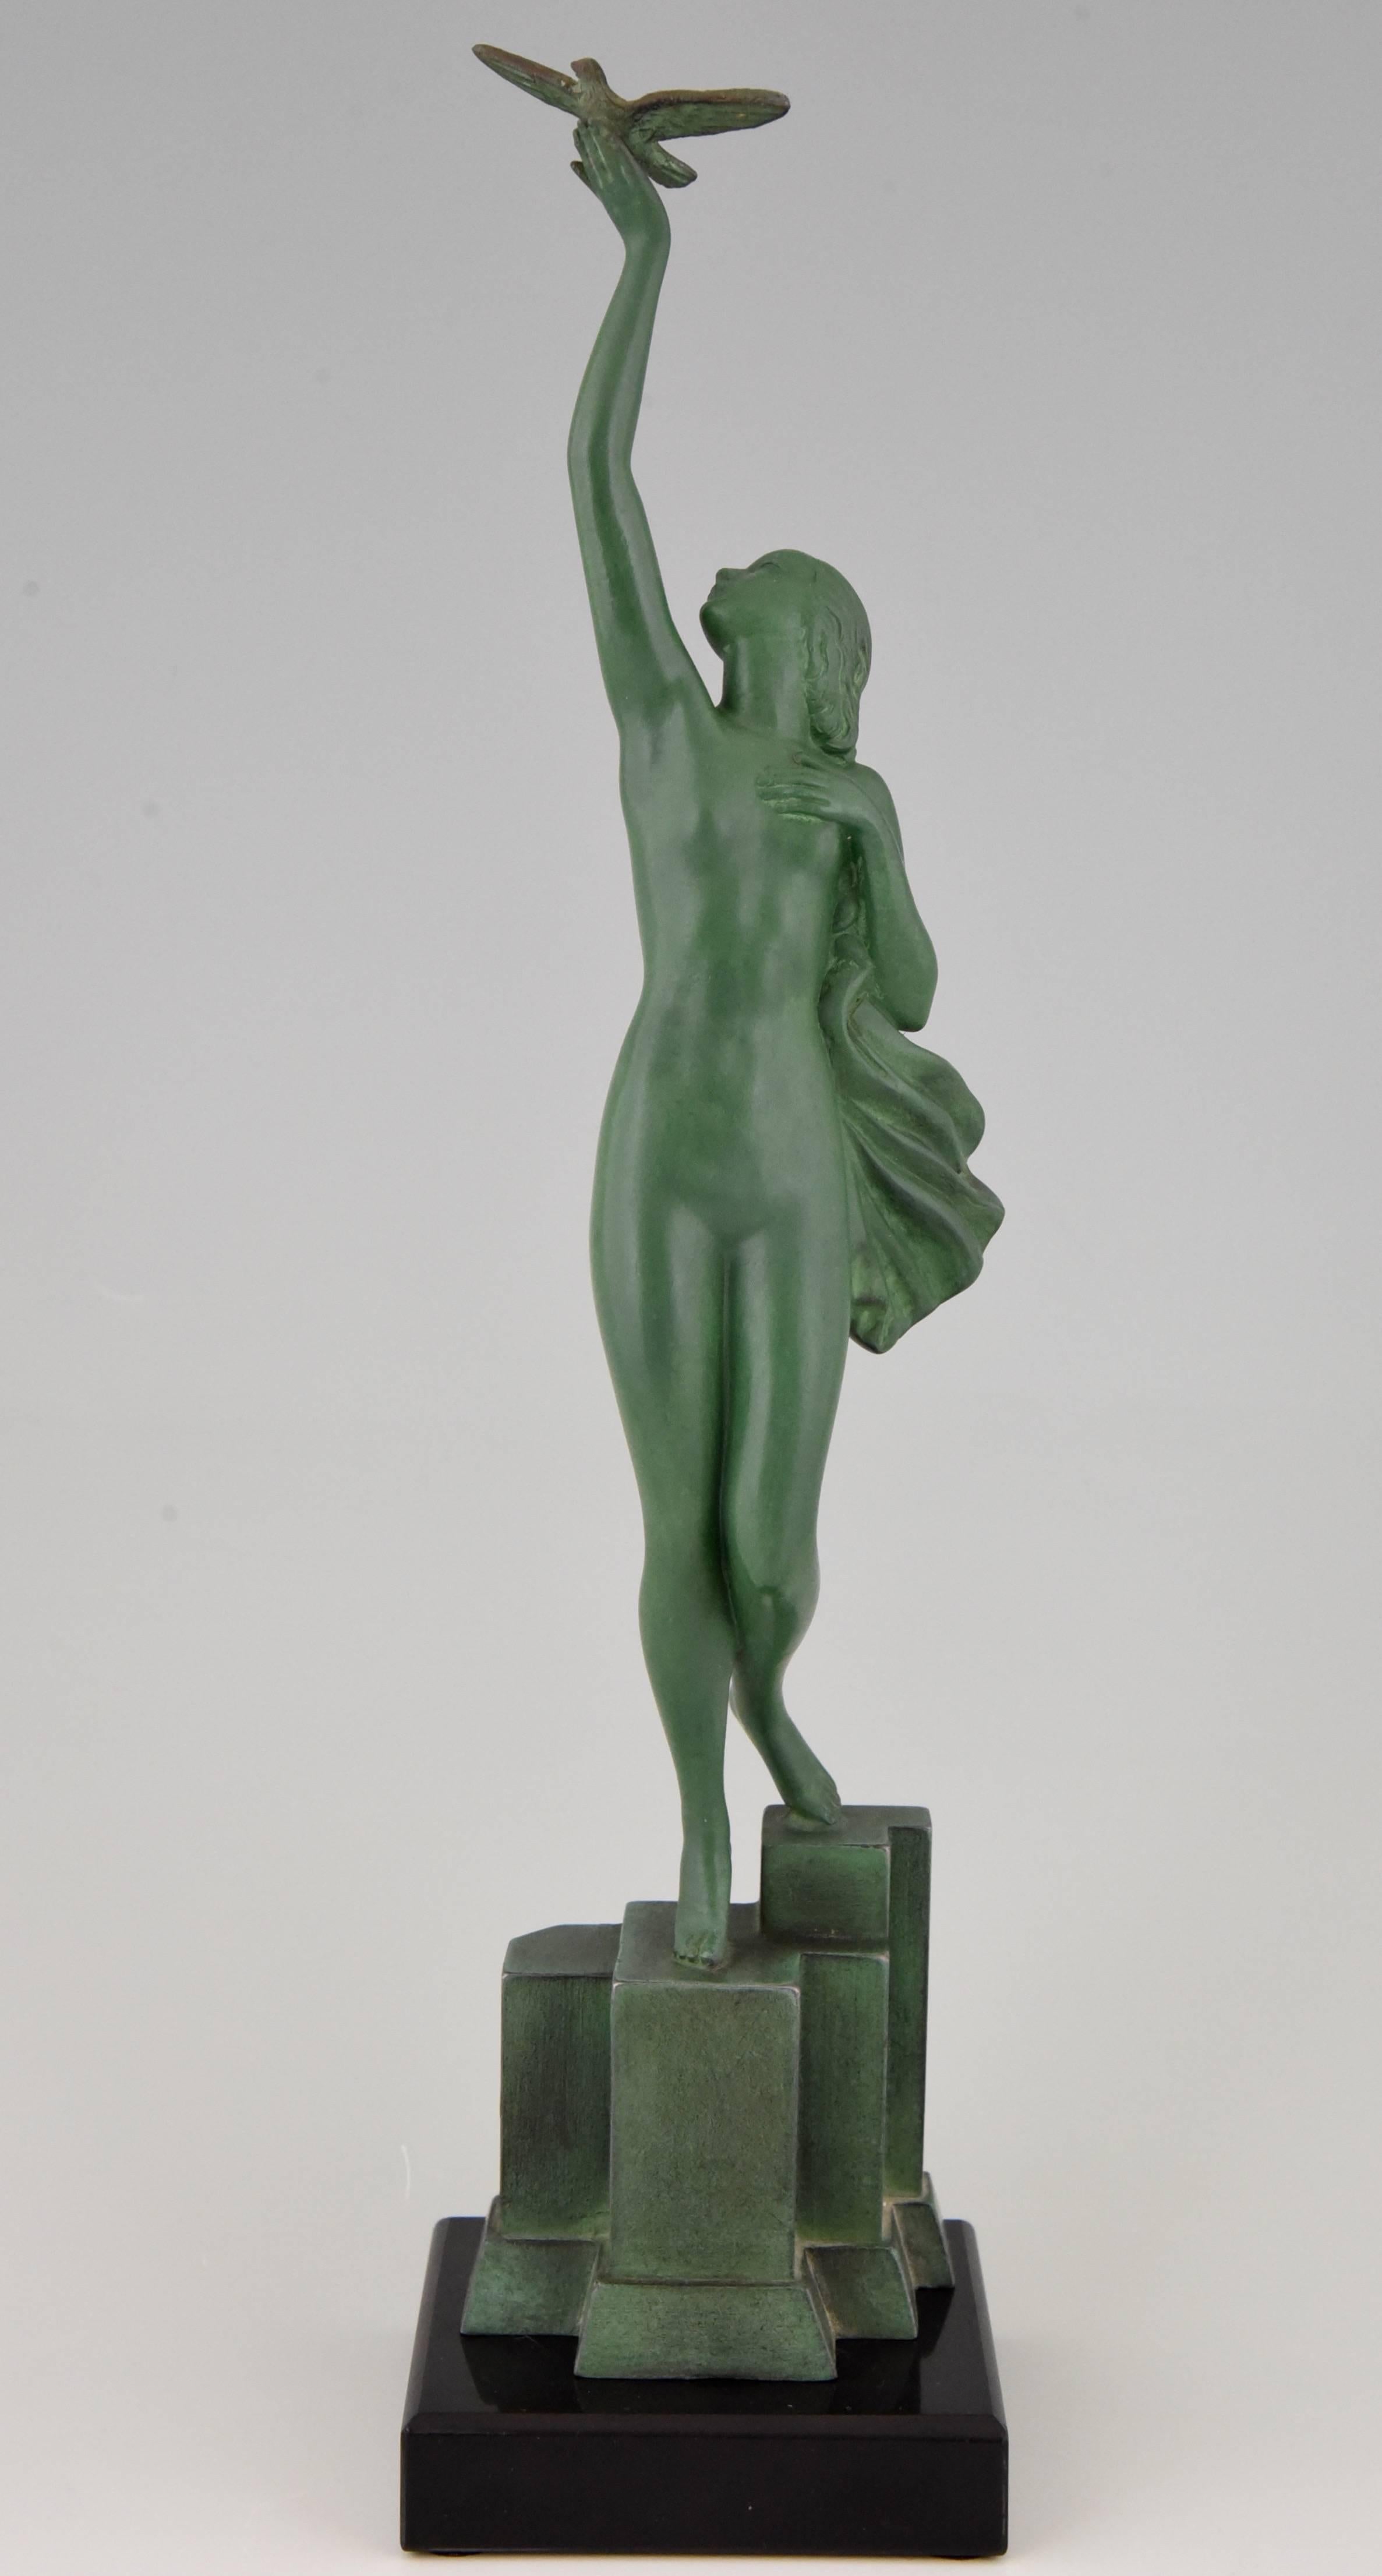 Message of love, beautiful Art Deco sculpture of a nude holding a dove by the French artist Fayral, pseudonym for Pierre Le Faguays, on a marble base.

Artist/ Maker: Fayral, Pierre Le Faguays.
Signature/ Marks: Fayral.
Style: Art Deco.
Date: